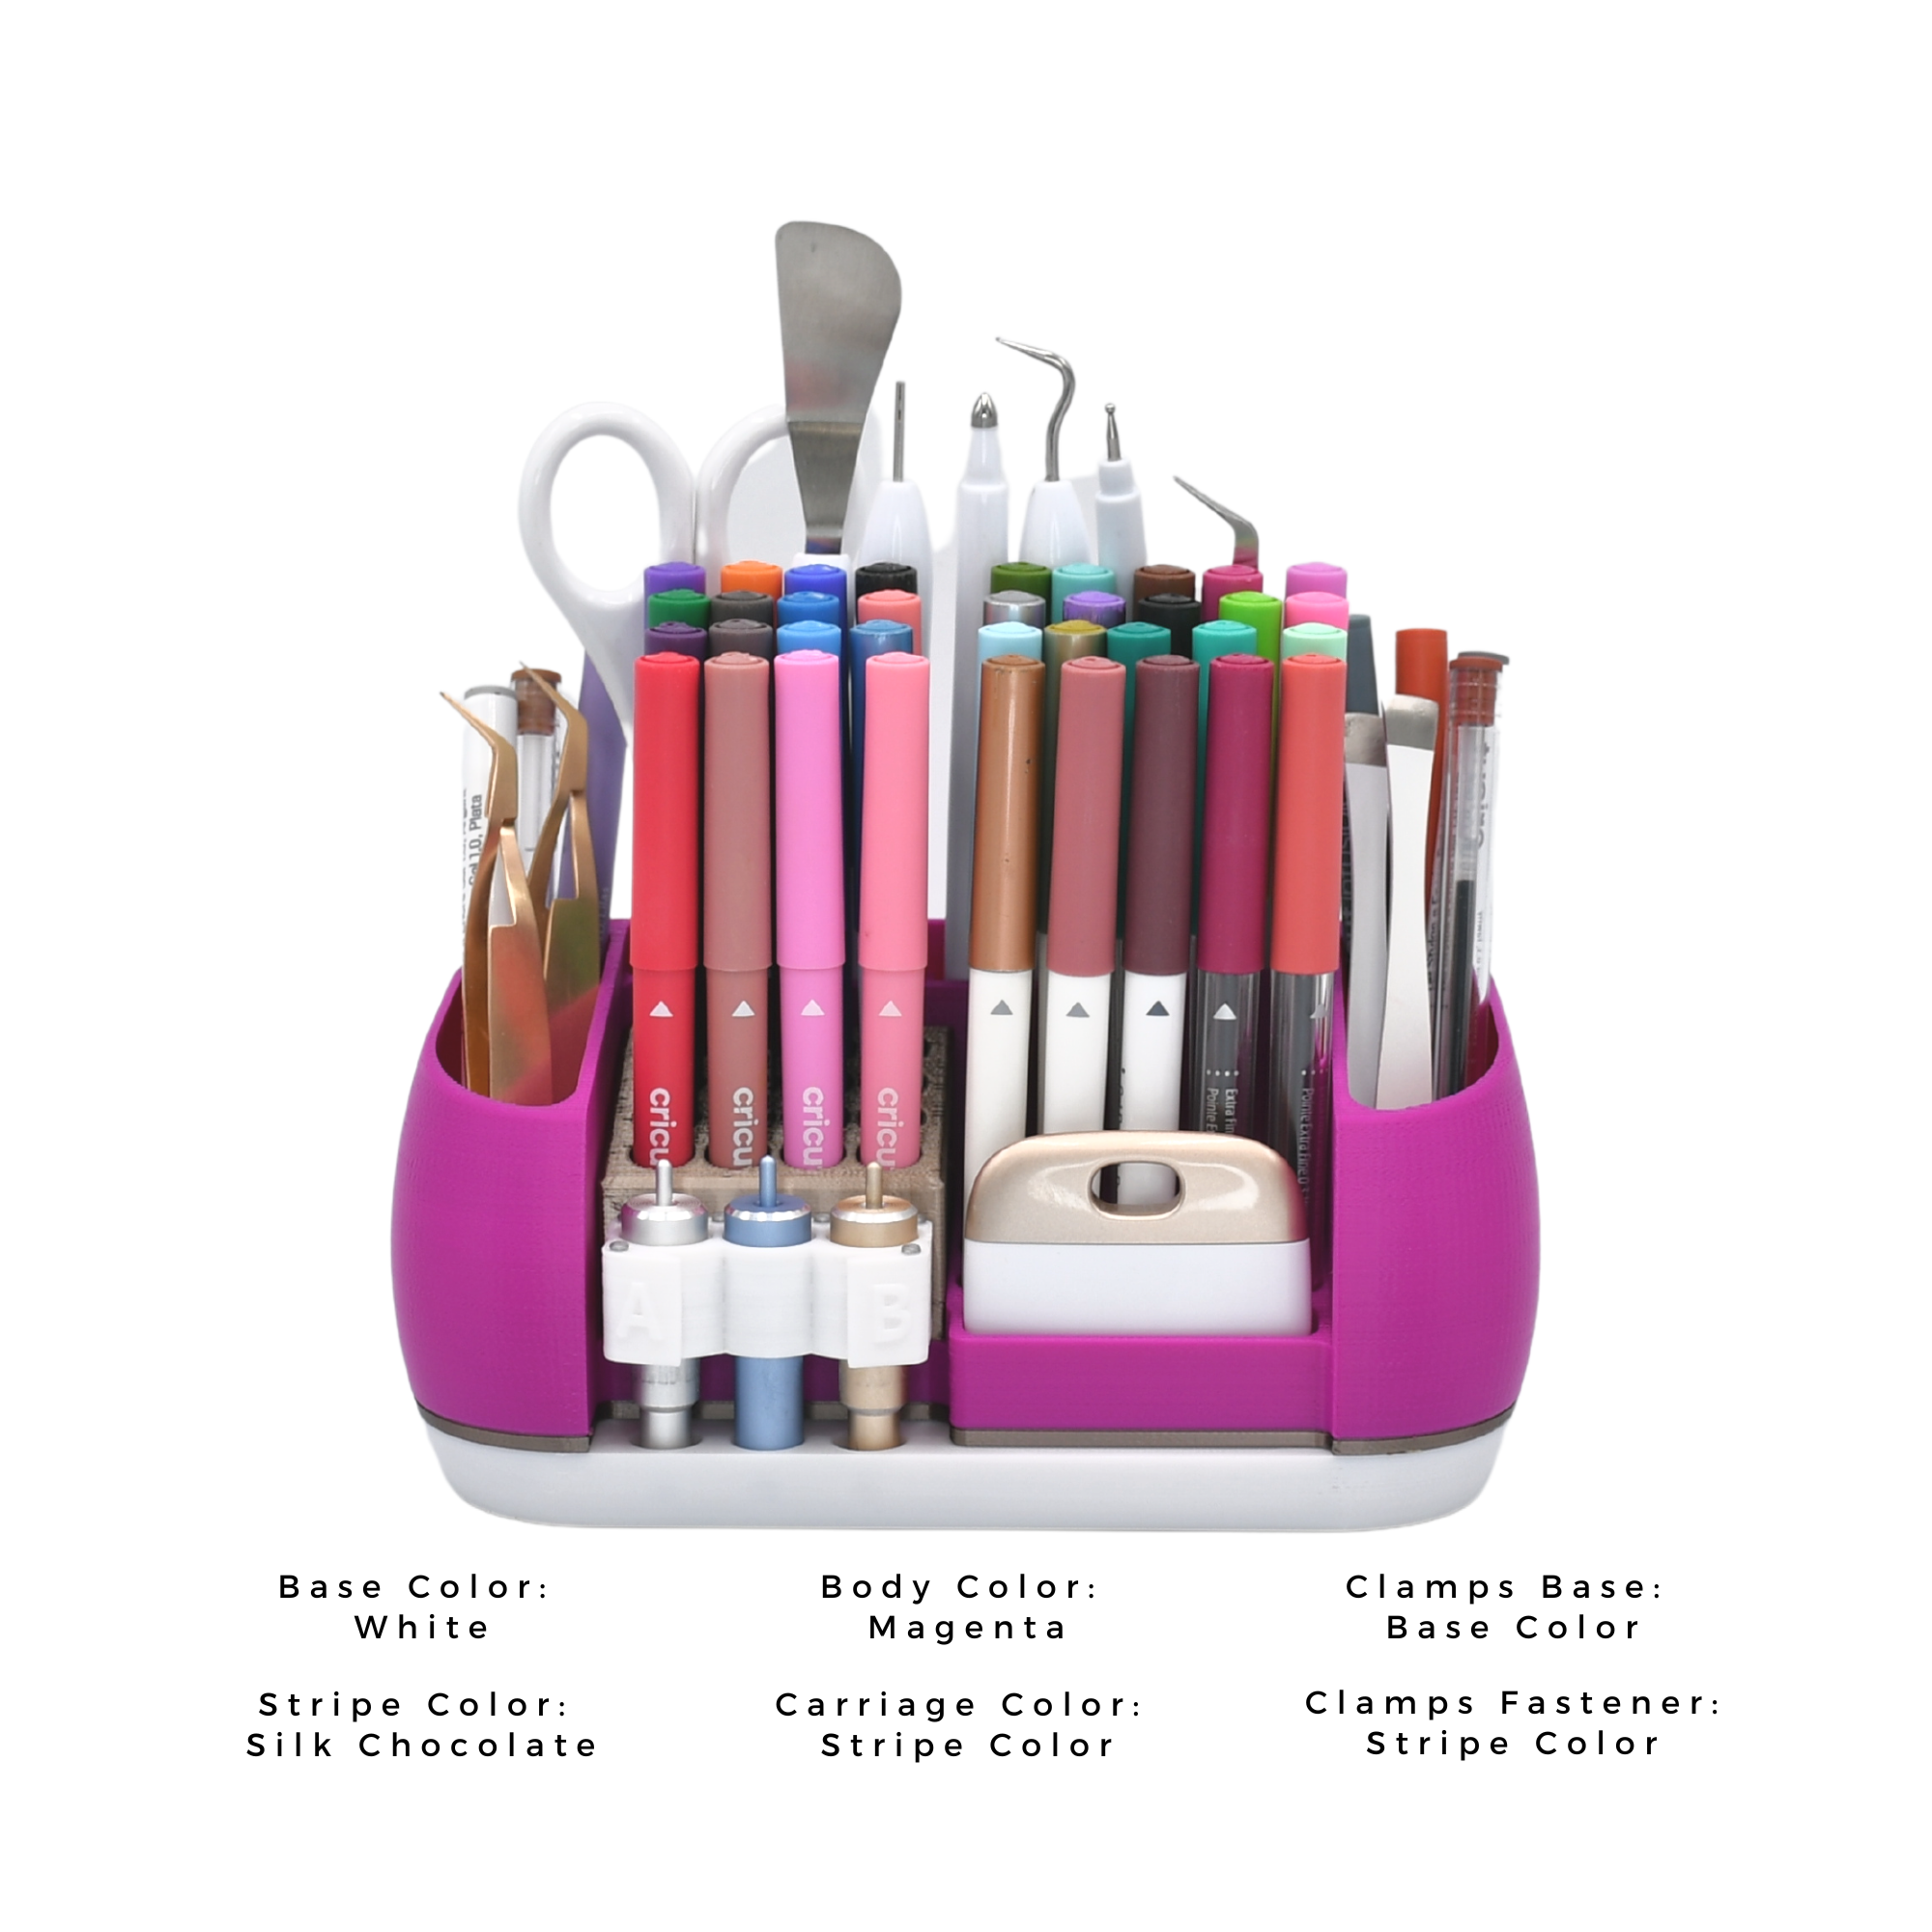 Cricut Tool, Pens and Accessories Oval Holder/ Oval Accessories Organiser  for Cricut Tools, Pens and Accessories / Desk Storage Cricut -  Hong  Kong